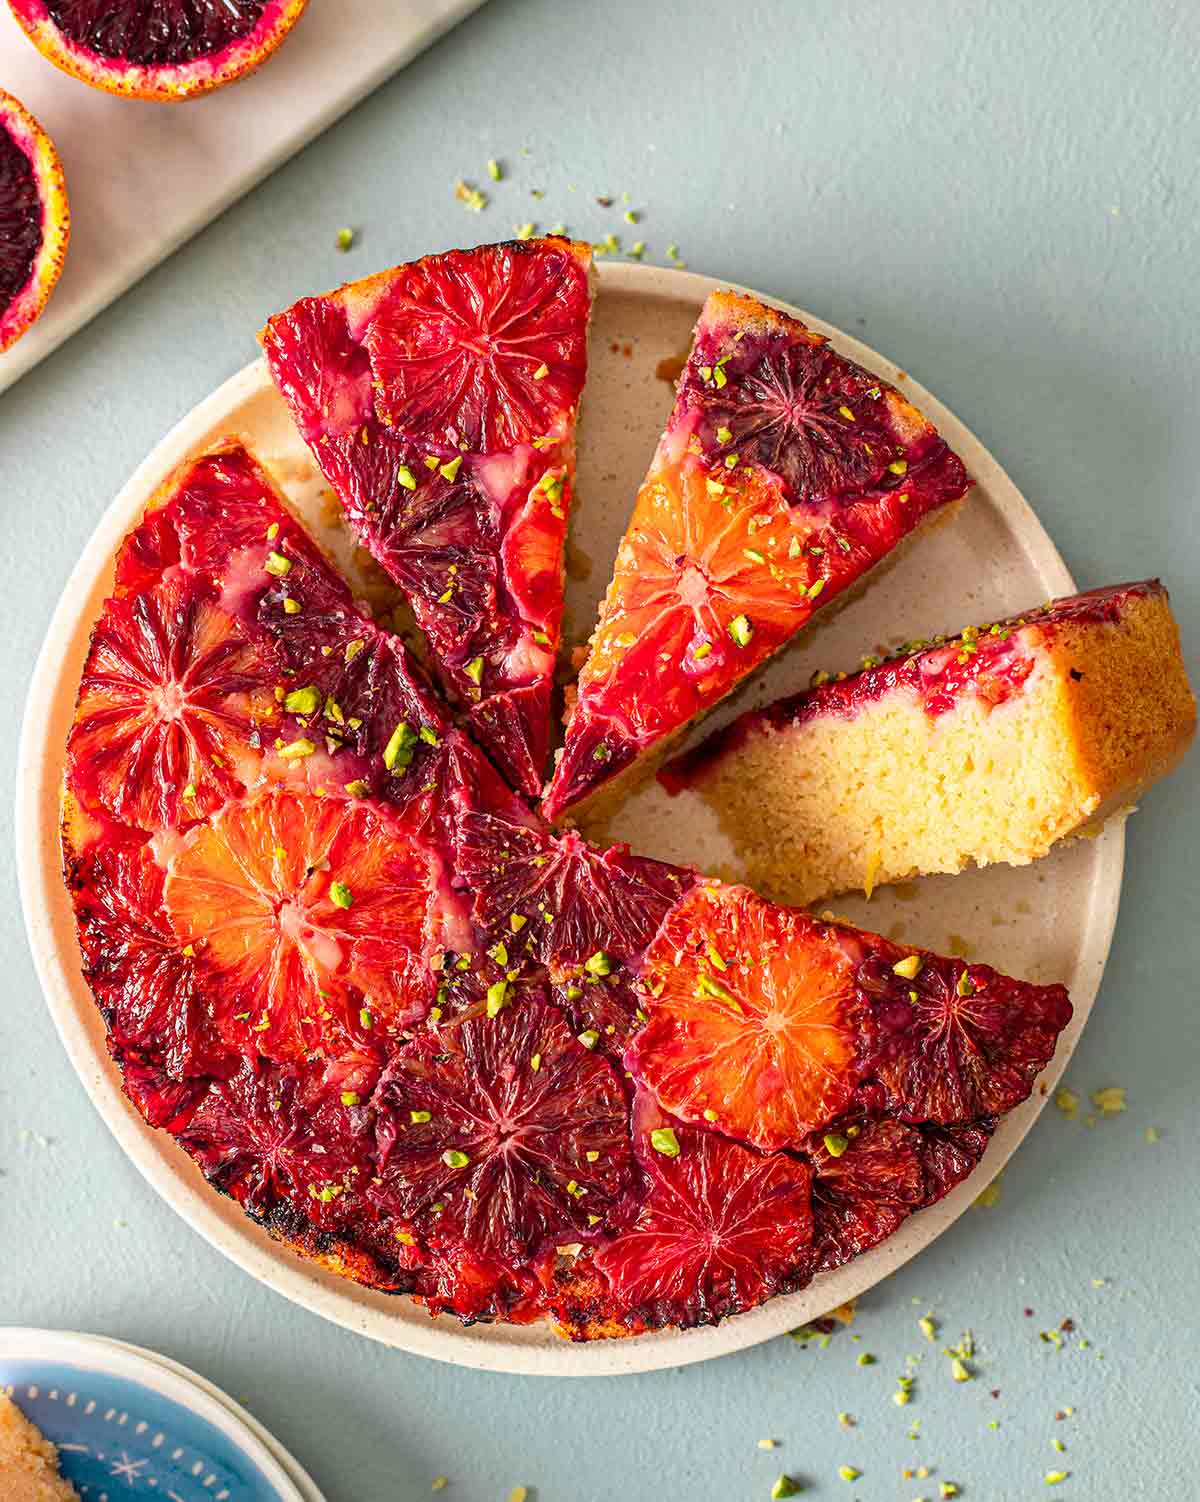 Upside down vegan blood orange cake on plate with a few slices cut out revealing golden fluffy interior.